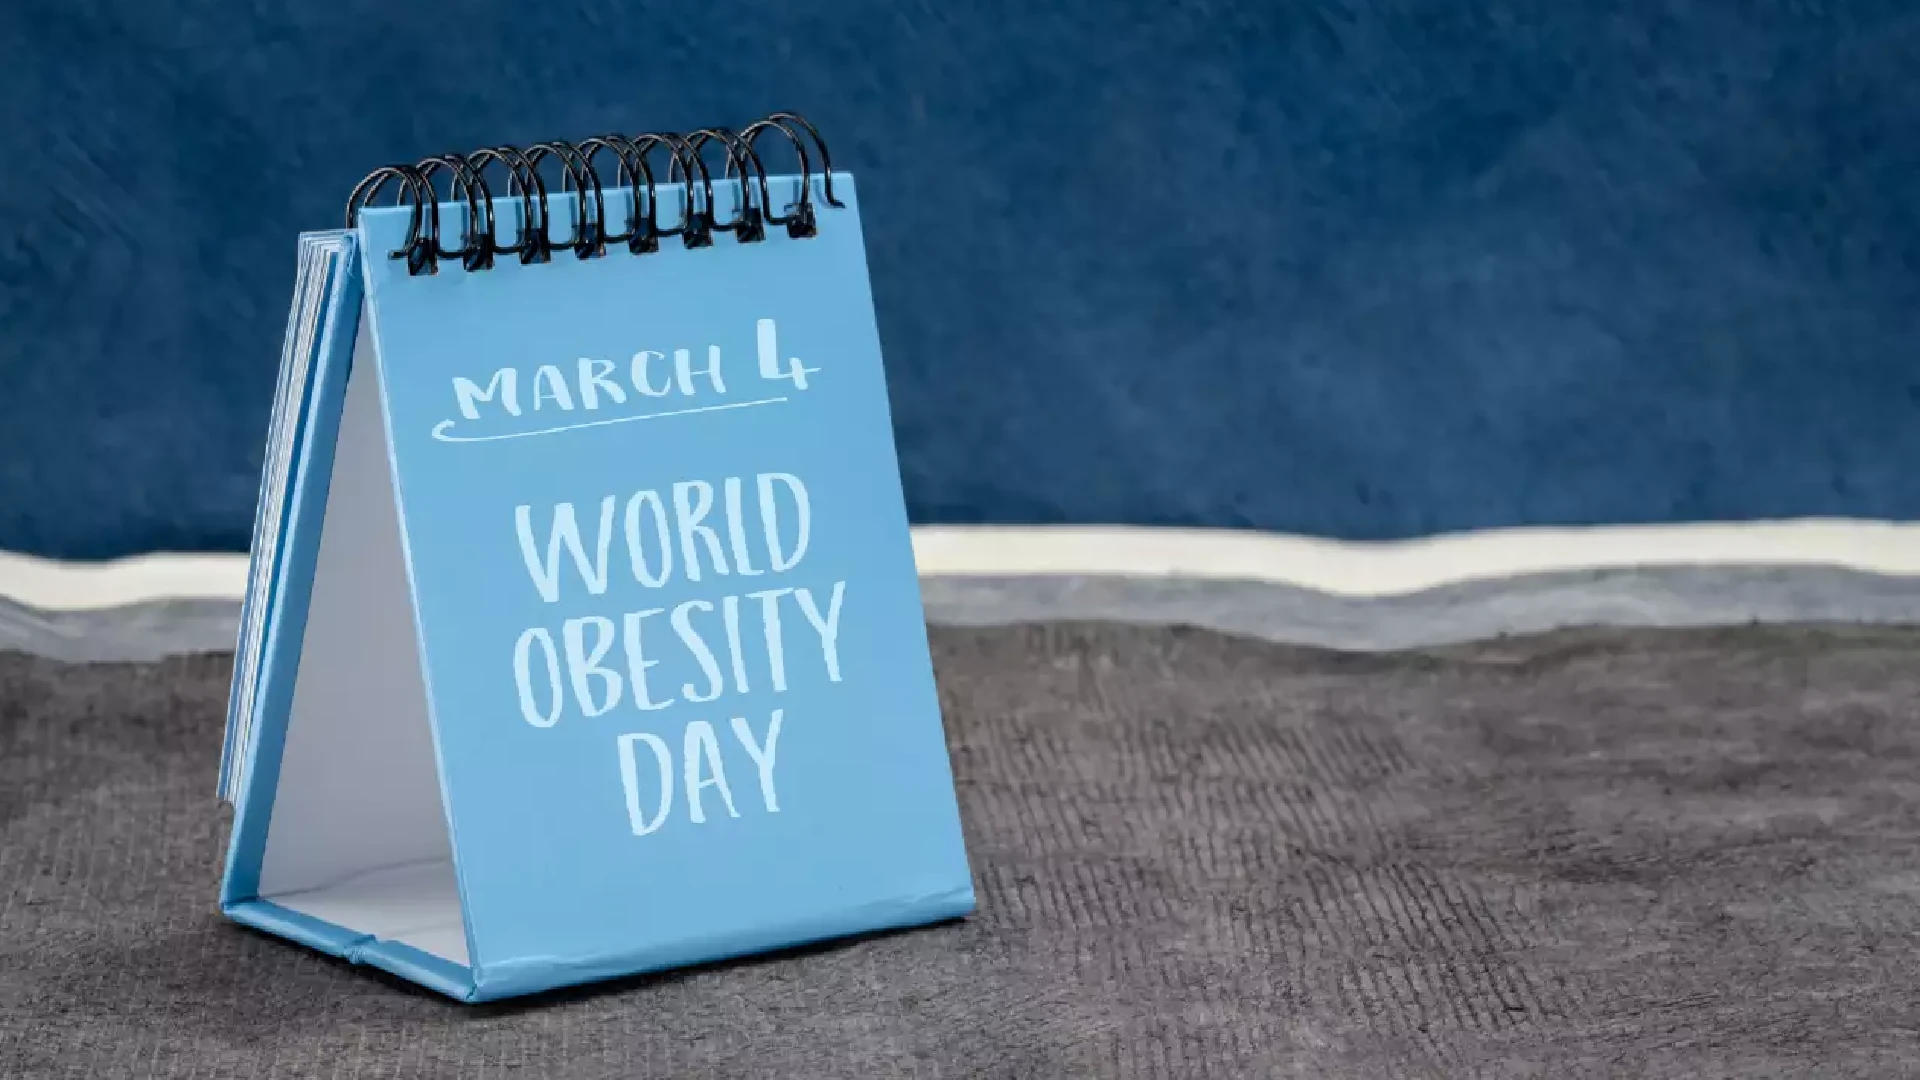 World Obesity Day 2022: Theme, Quotes And Wishes To Share On March 4